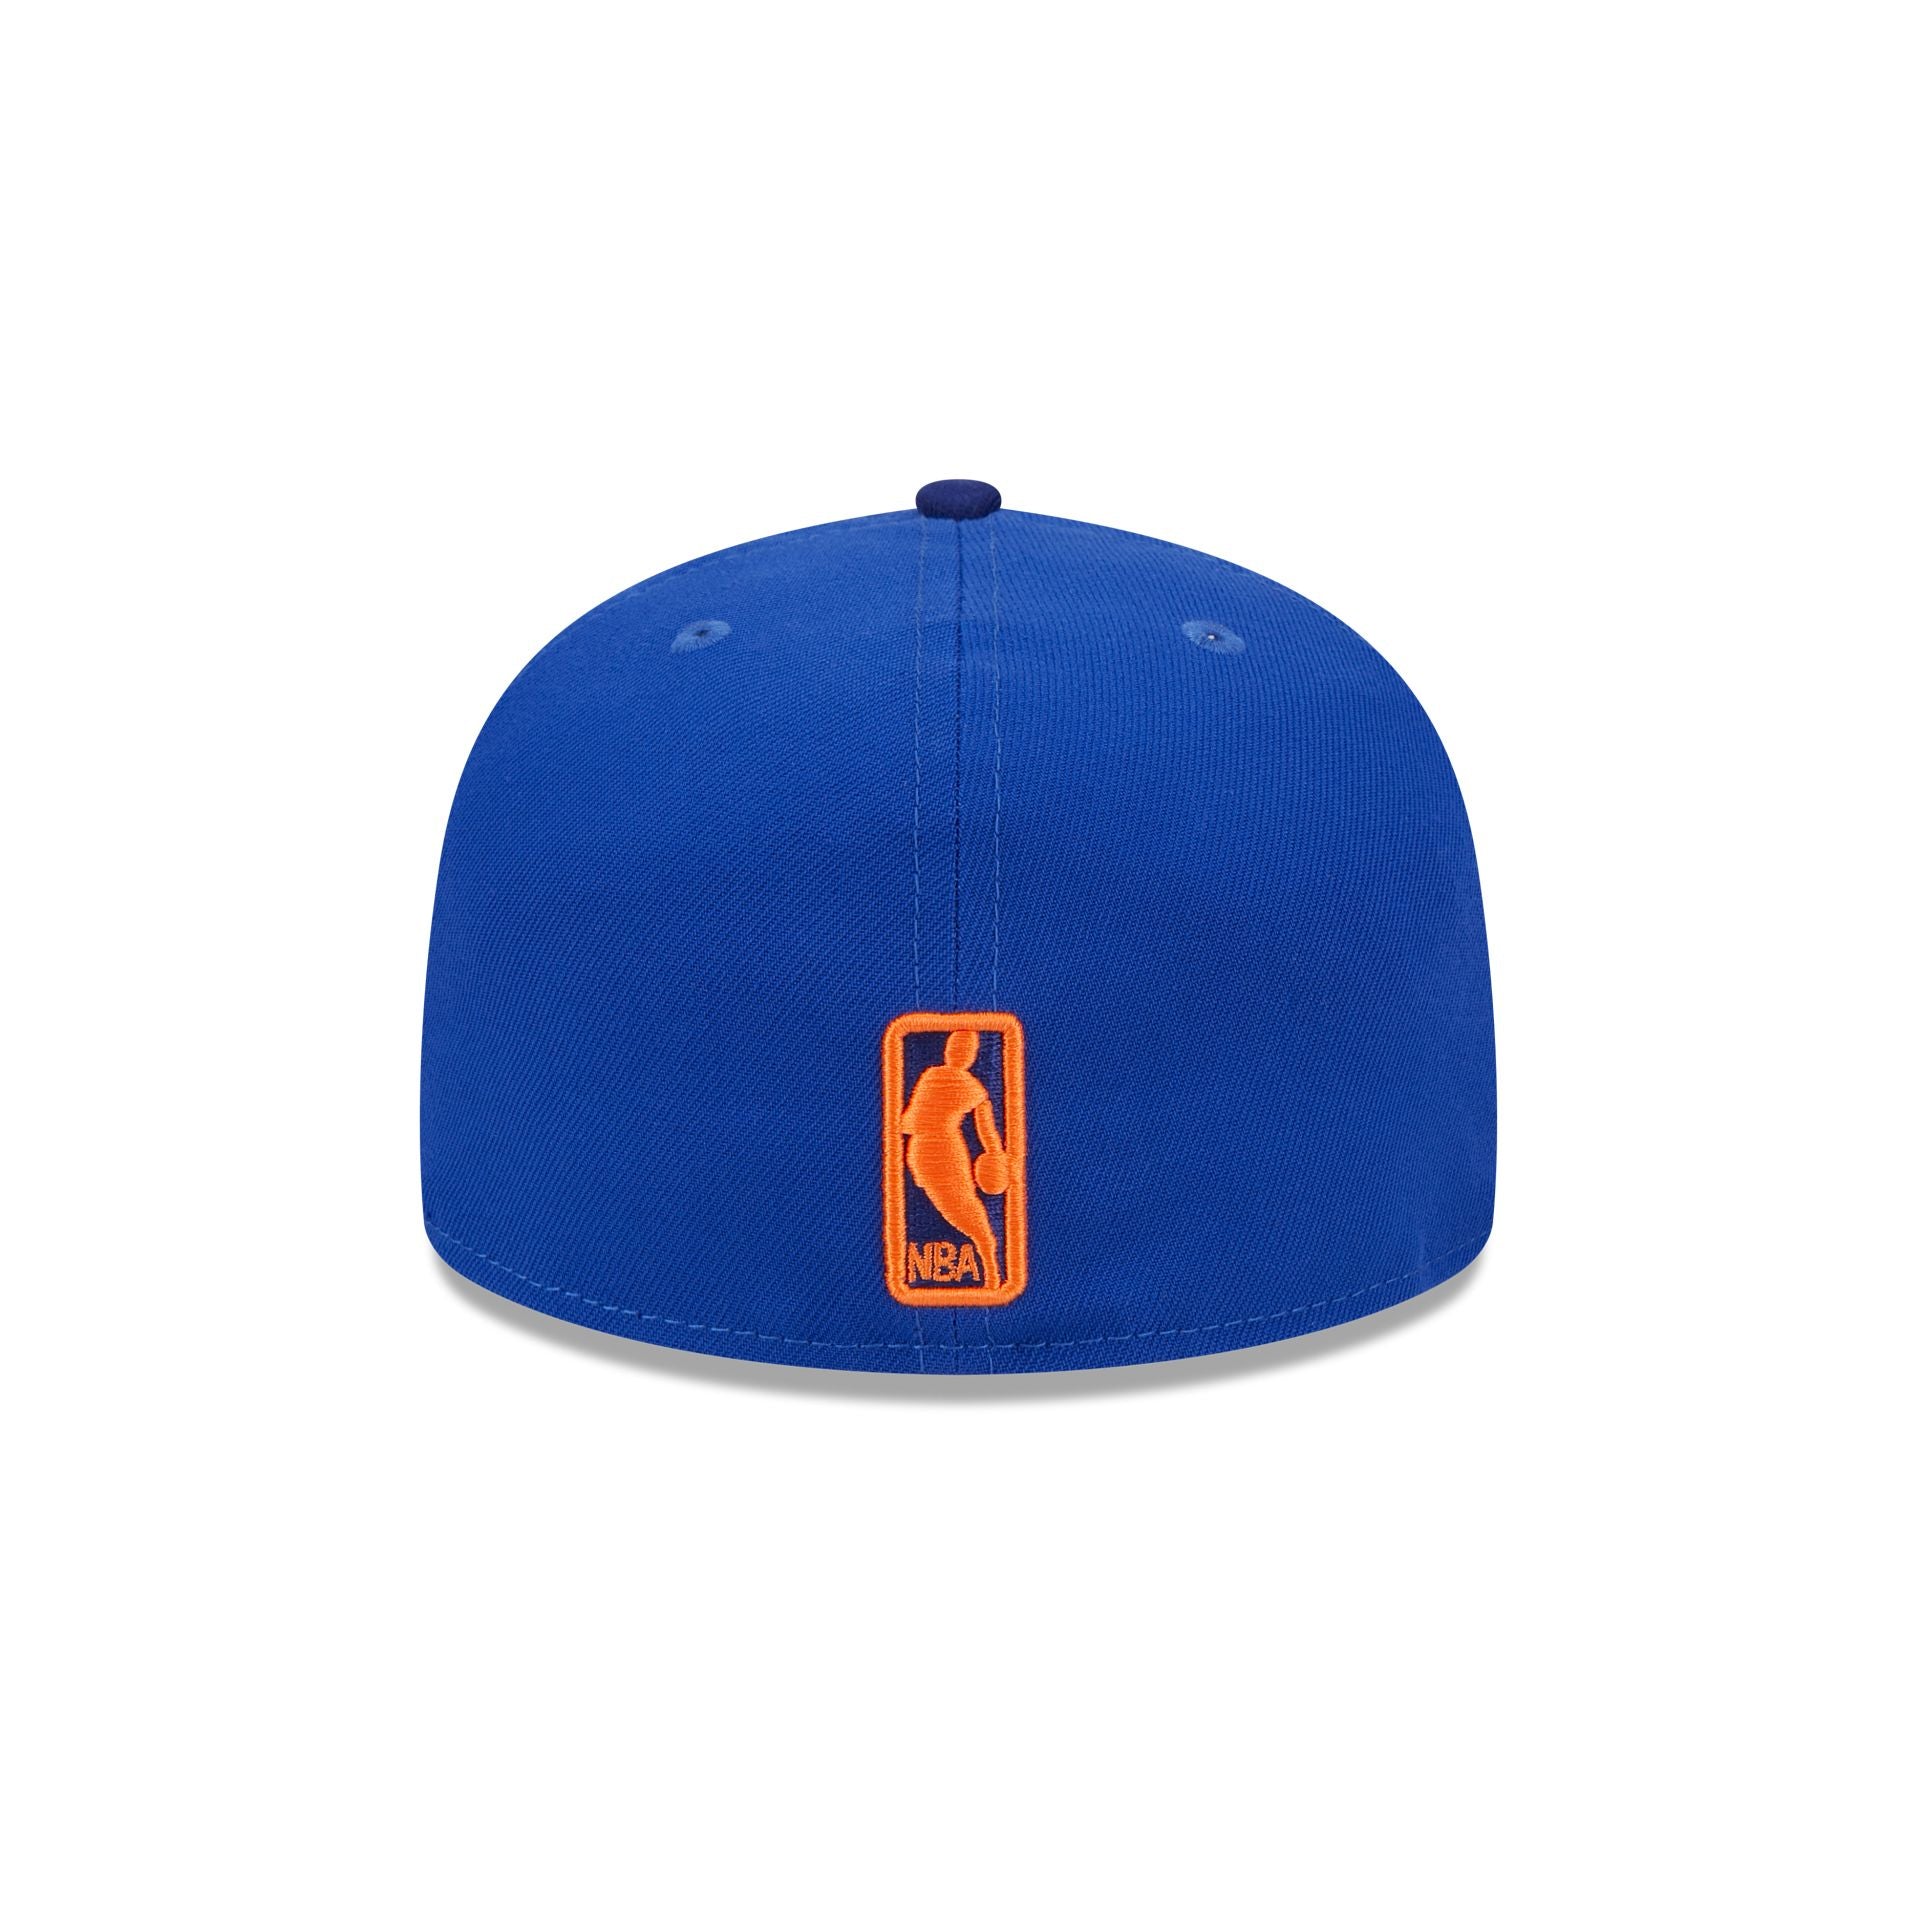 New York Knicks New Era Hat 59Fifty Fitted Cap Size 7 1/8 NBA Basketball  Blue